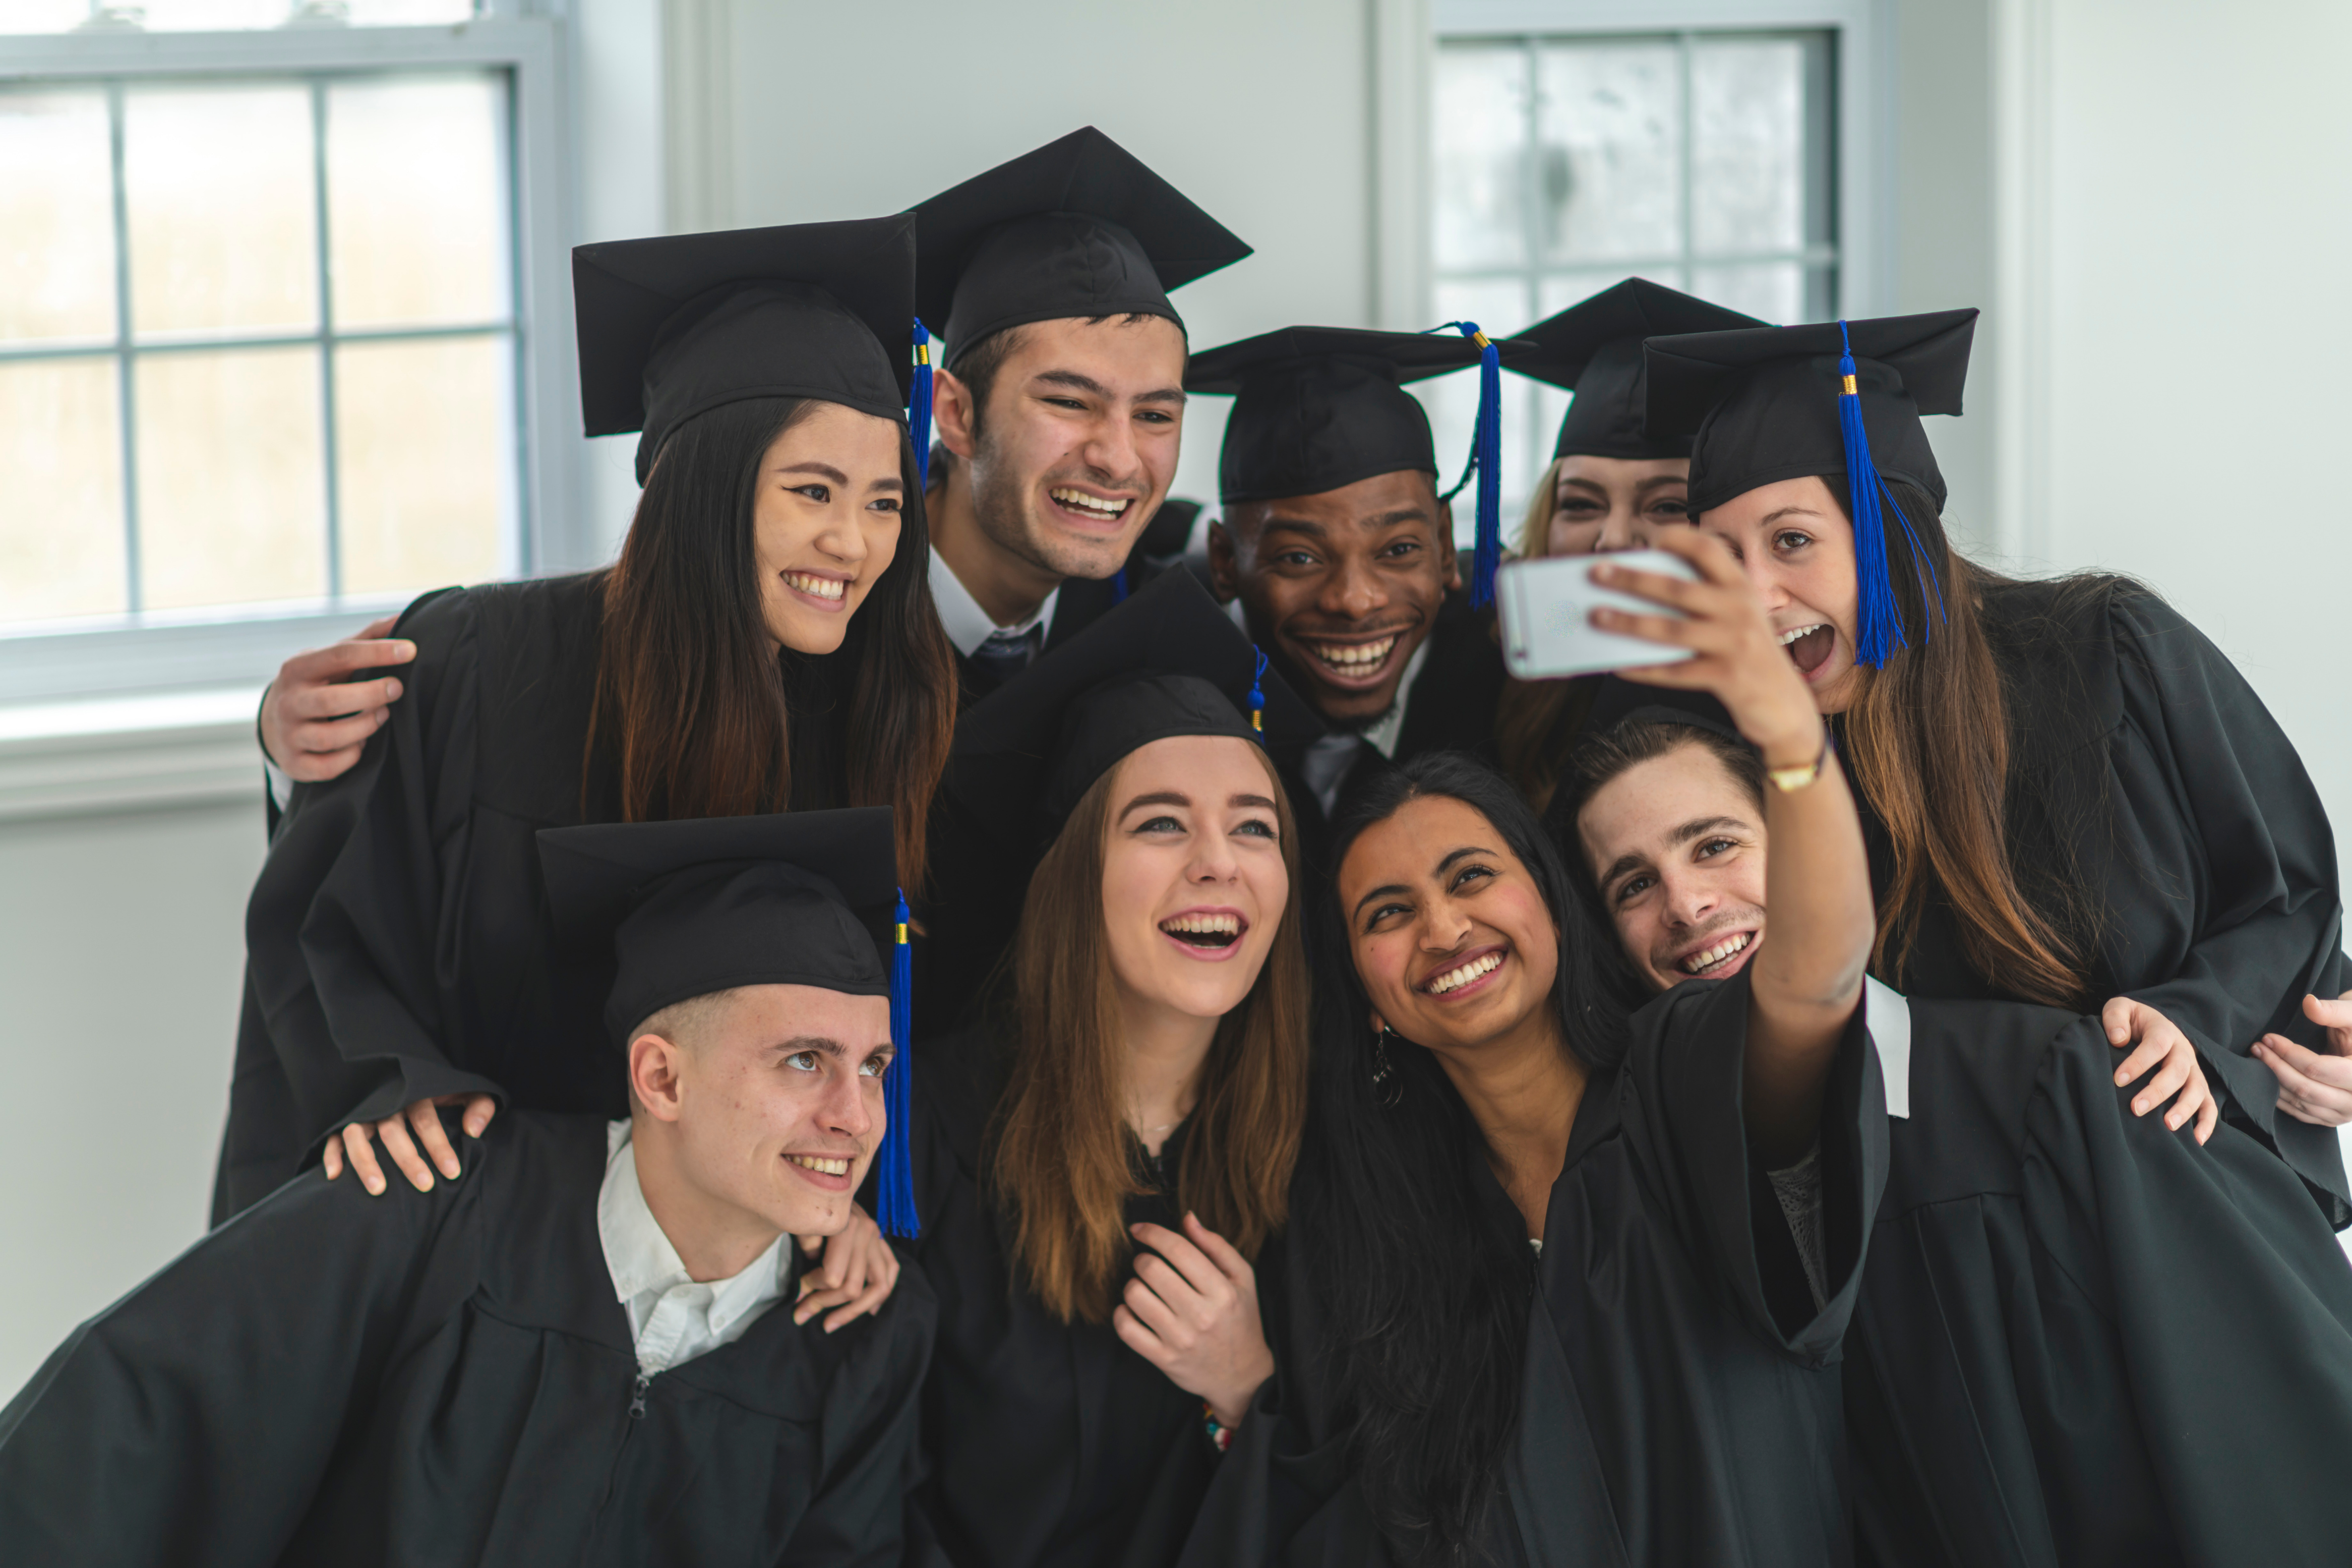 Nine happy college students in their cap and gown for graduation taking a selfie together. ERP software for education can help education institutions operate smoothly and help students succeed.